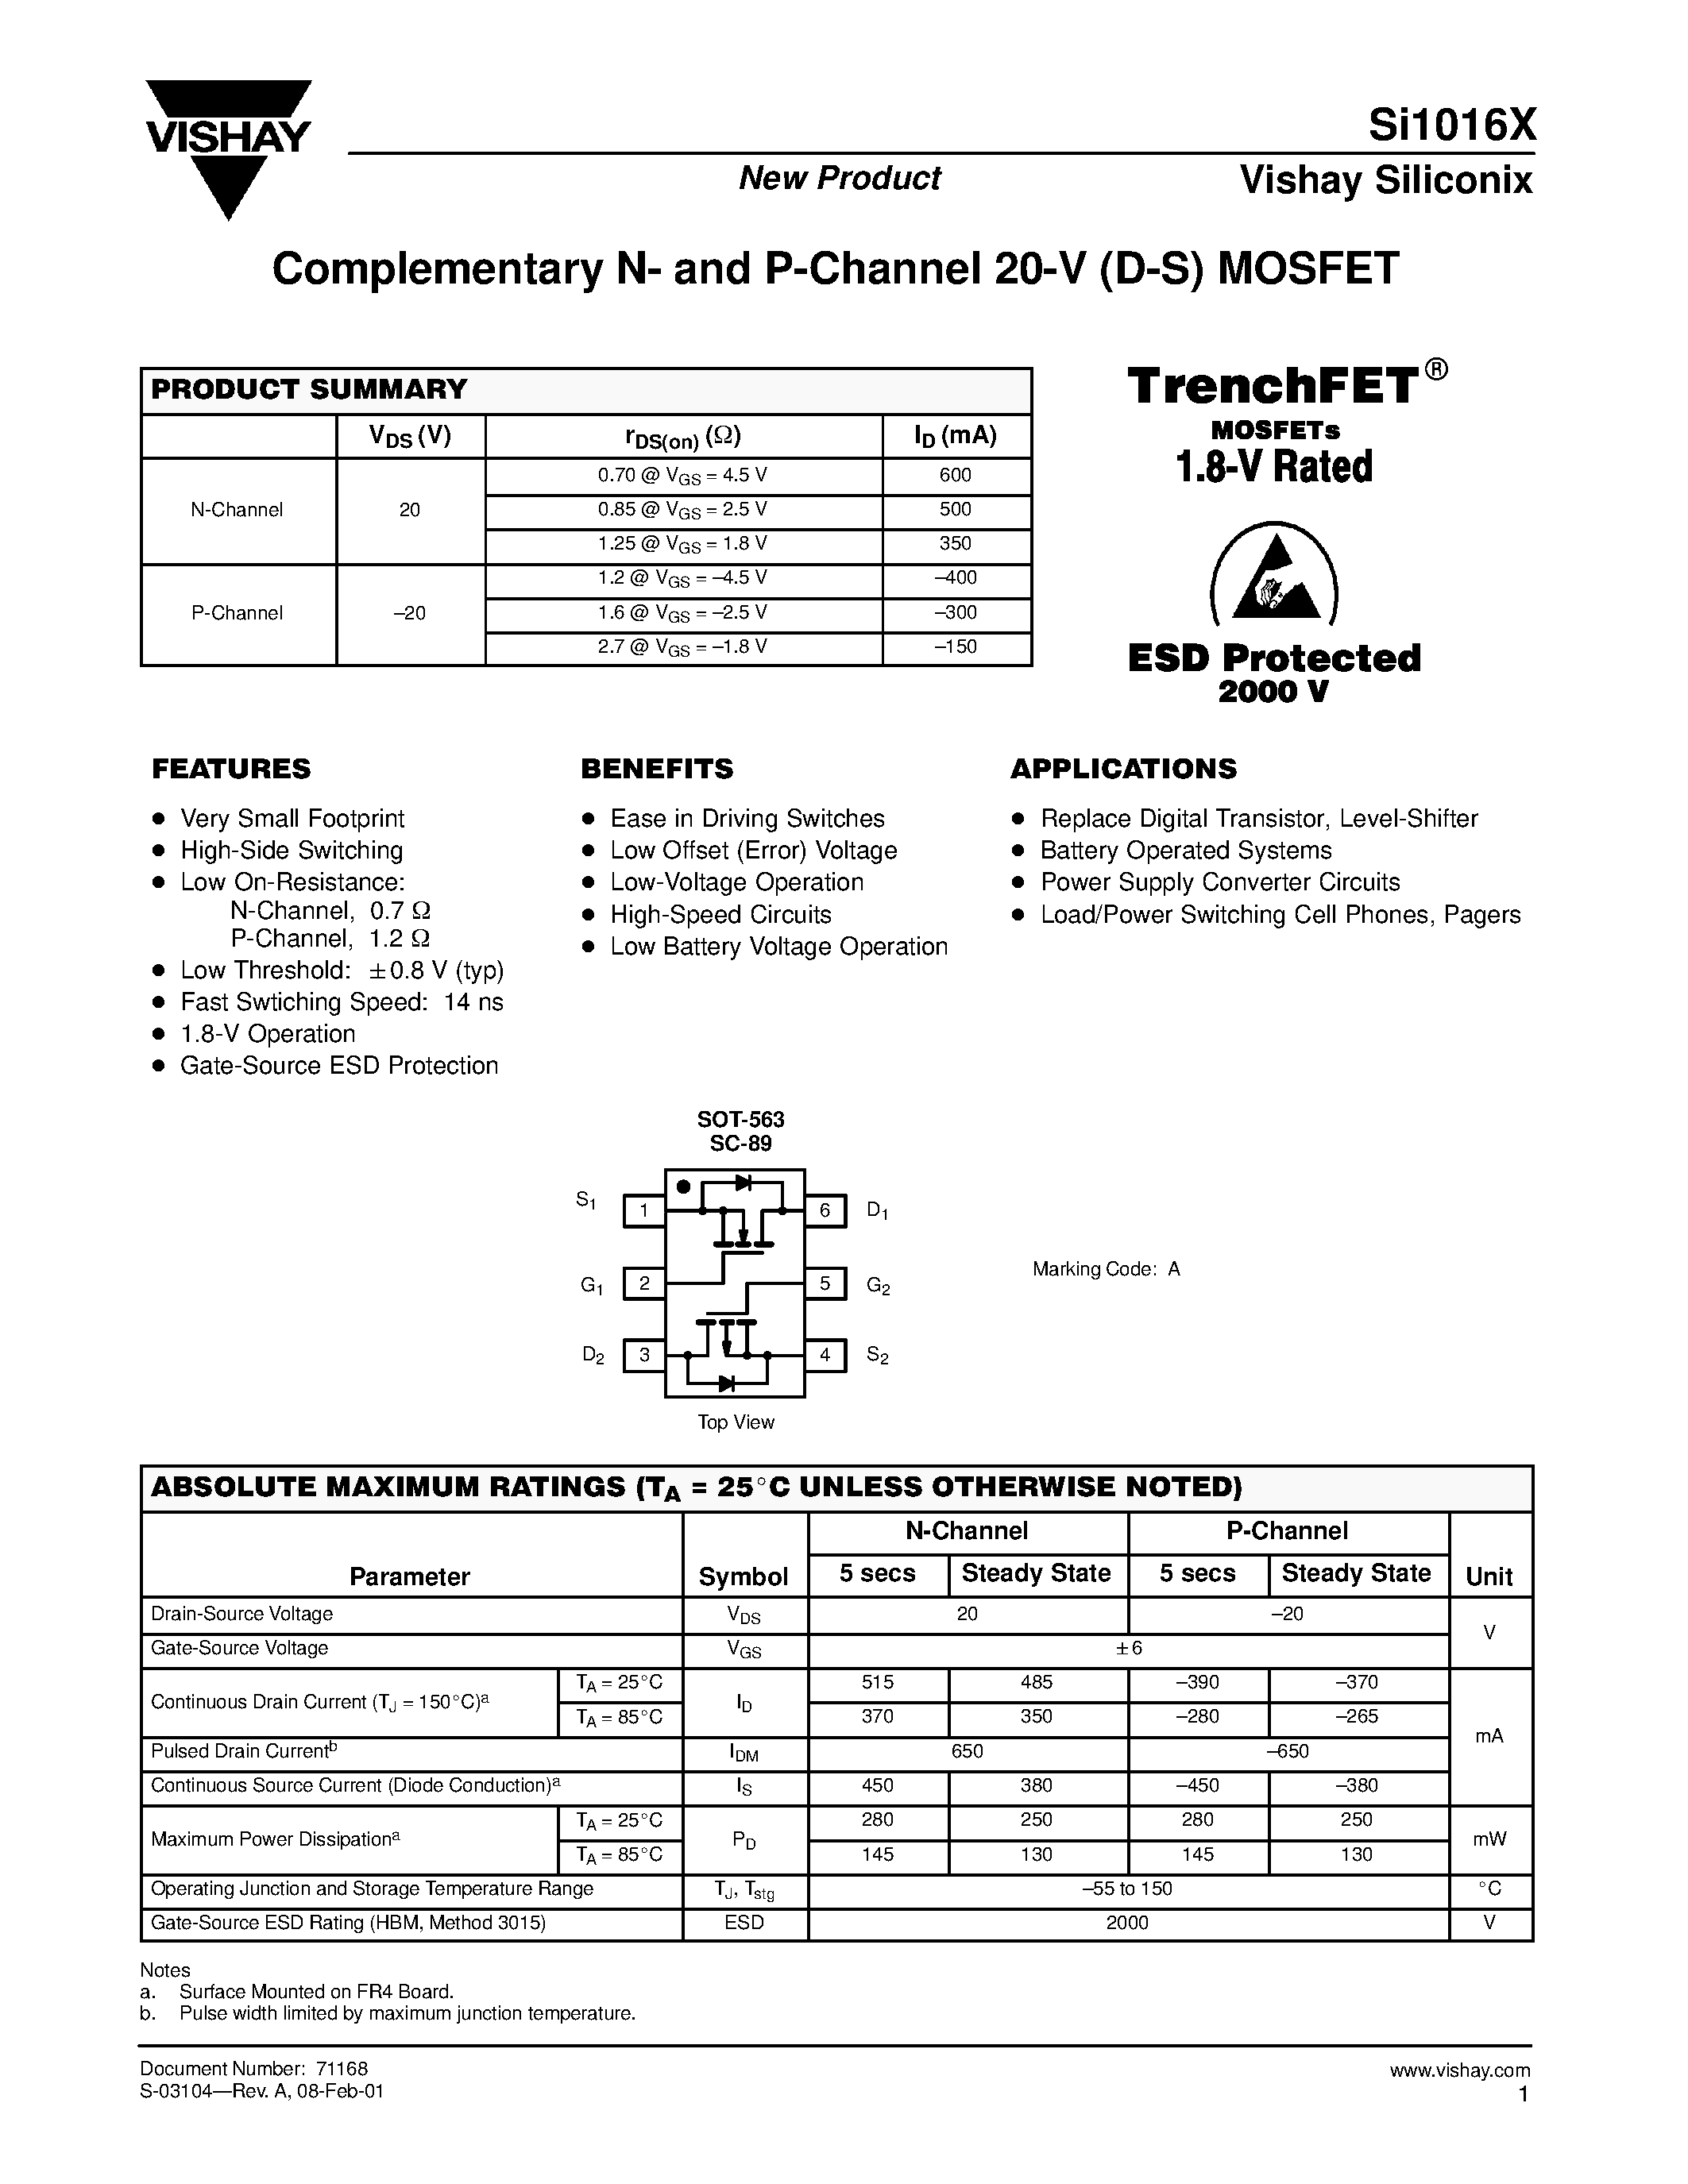 Даташит SI1016X - Complementary N and P-Channel 20-V (D-S) MOSFET страница 1